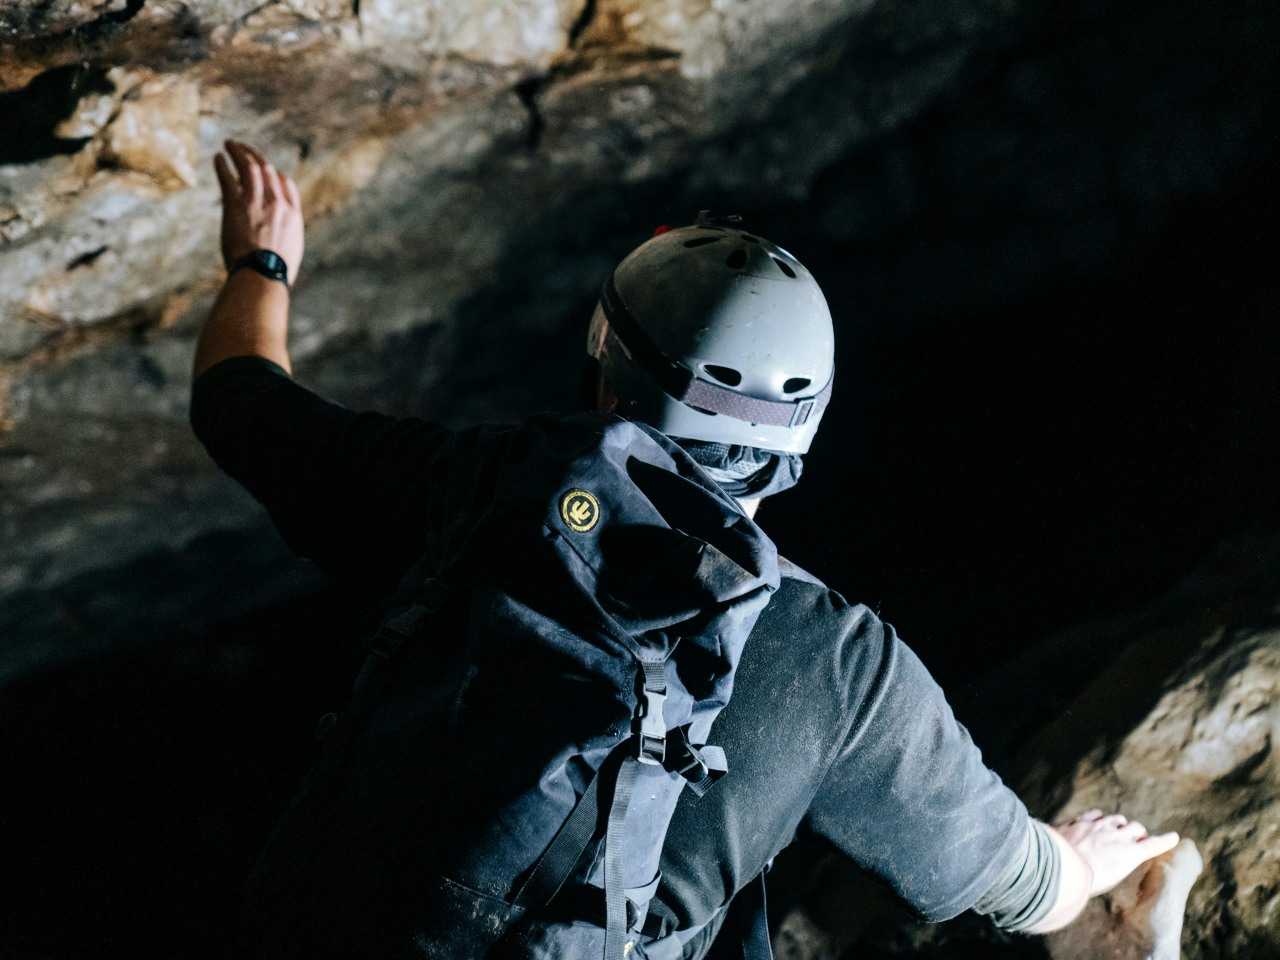 Man in cave with helmet and backpack